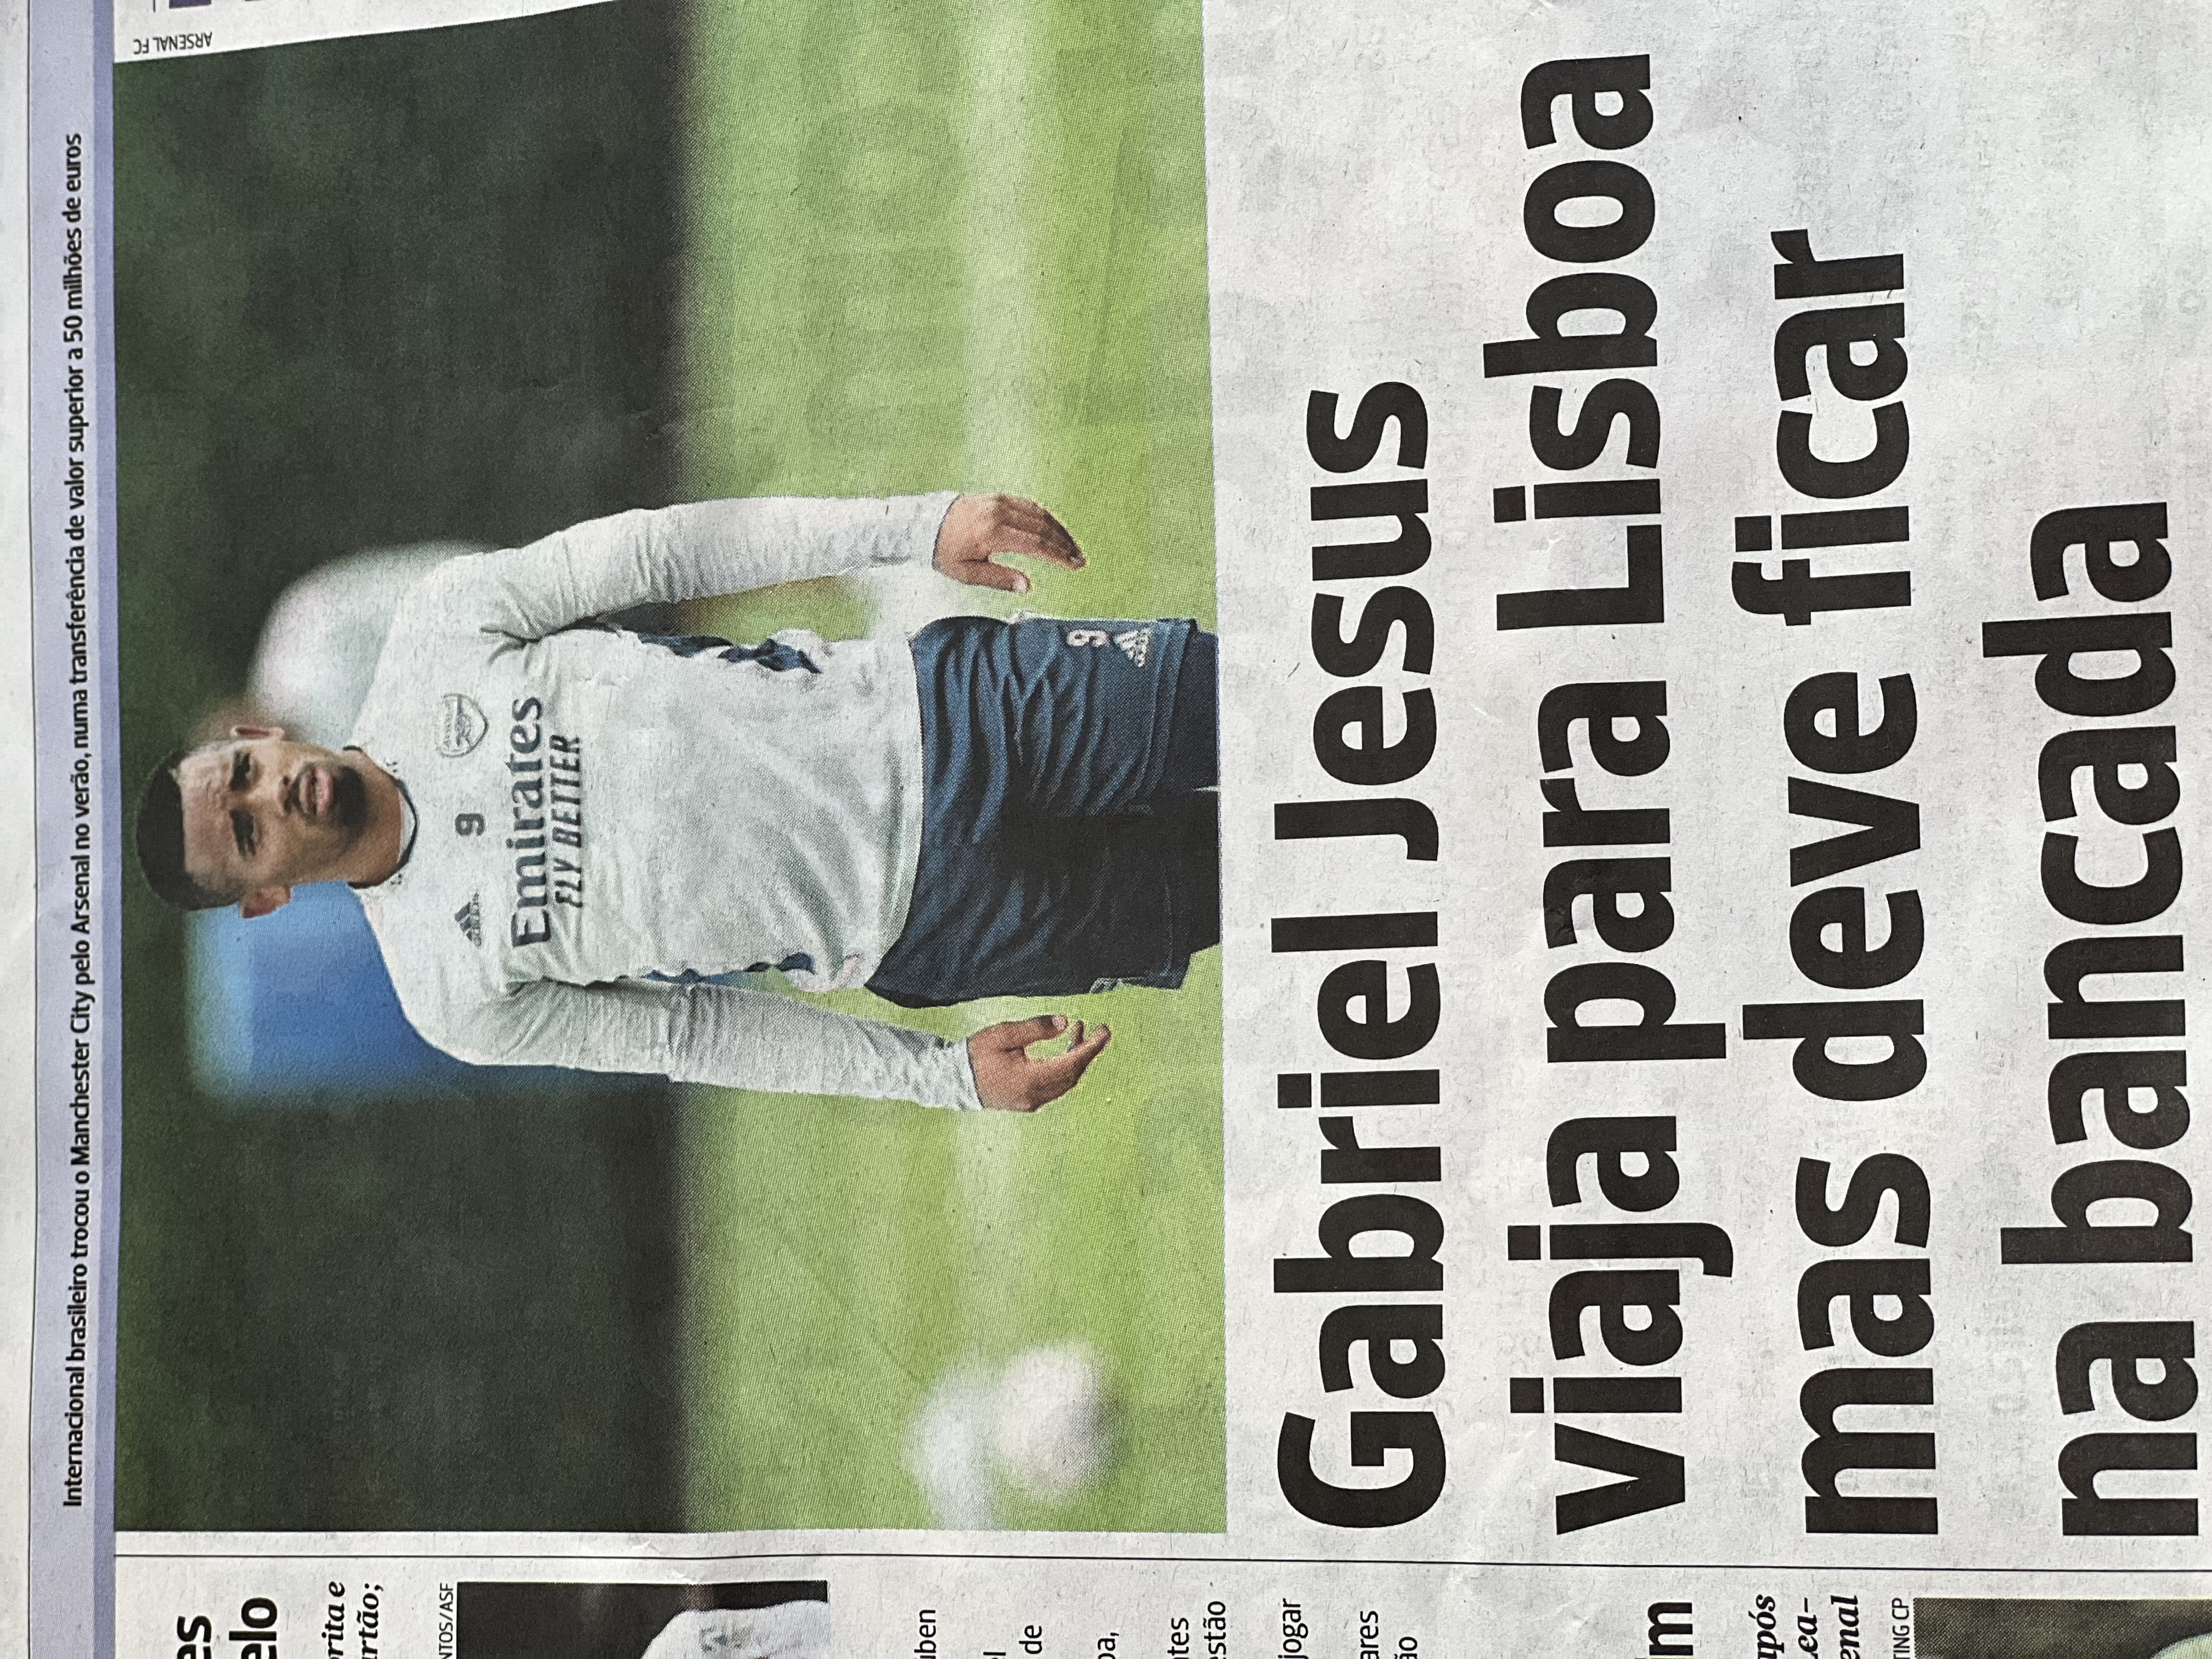 Gabriel Jesus set to travel with Arsenal to Lisbon for Europa League clash says Portuguese sports newspaper A Bola